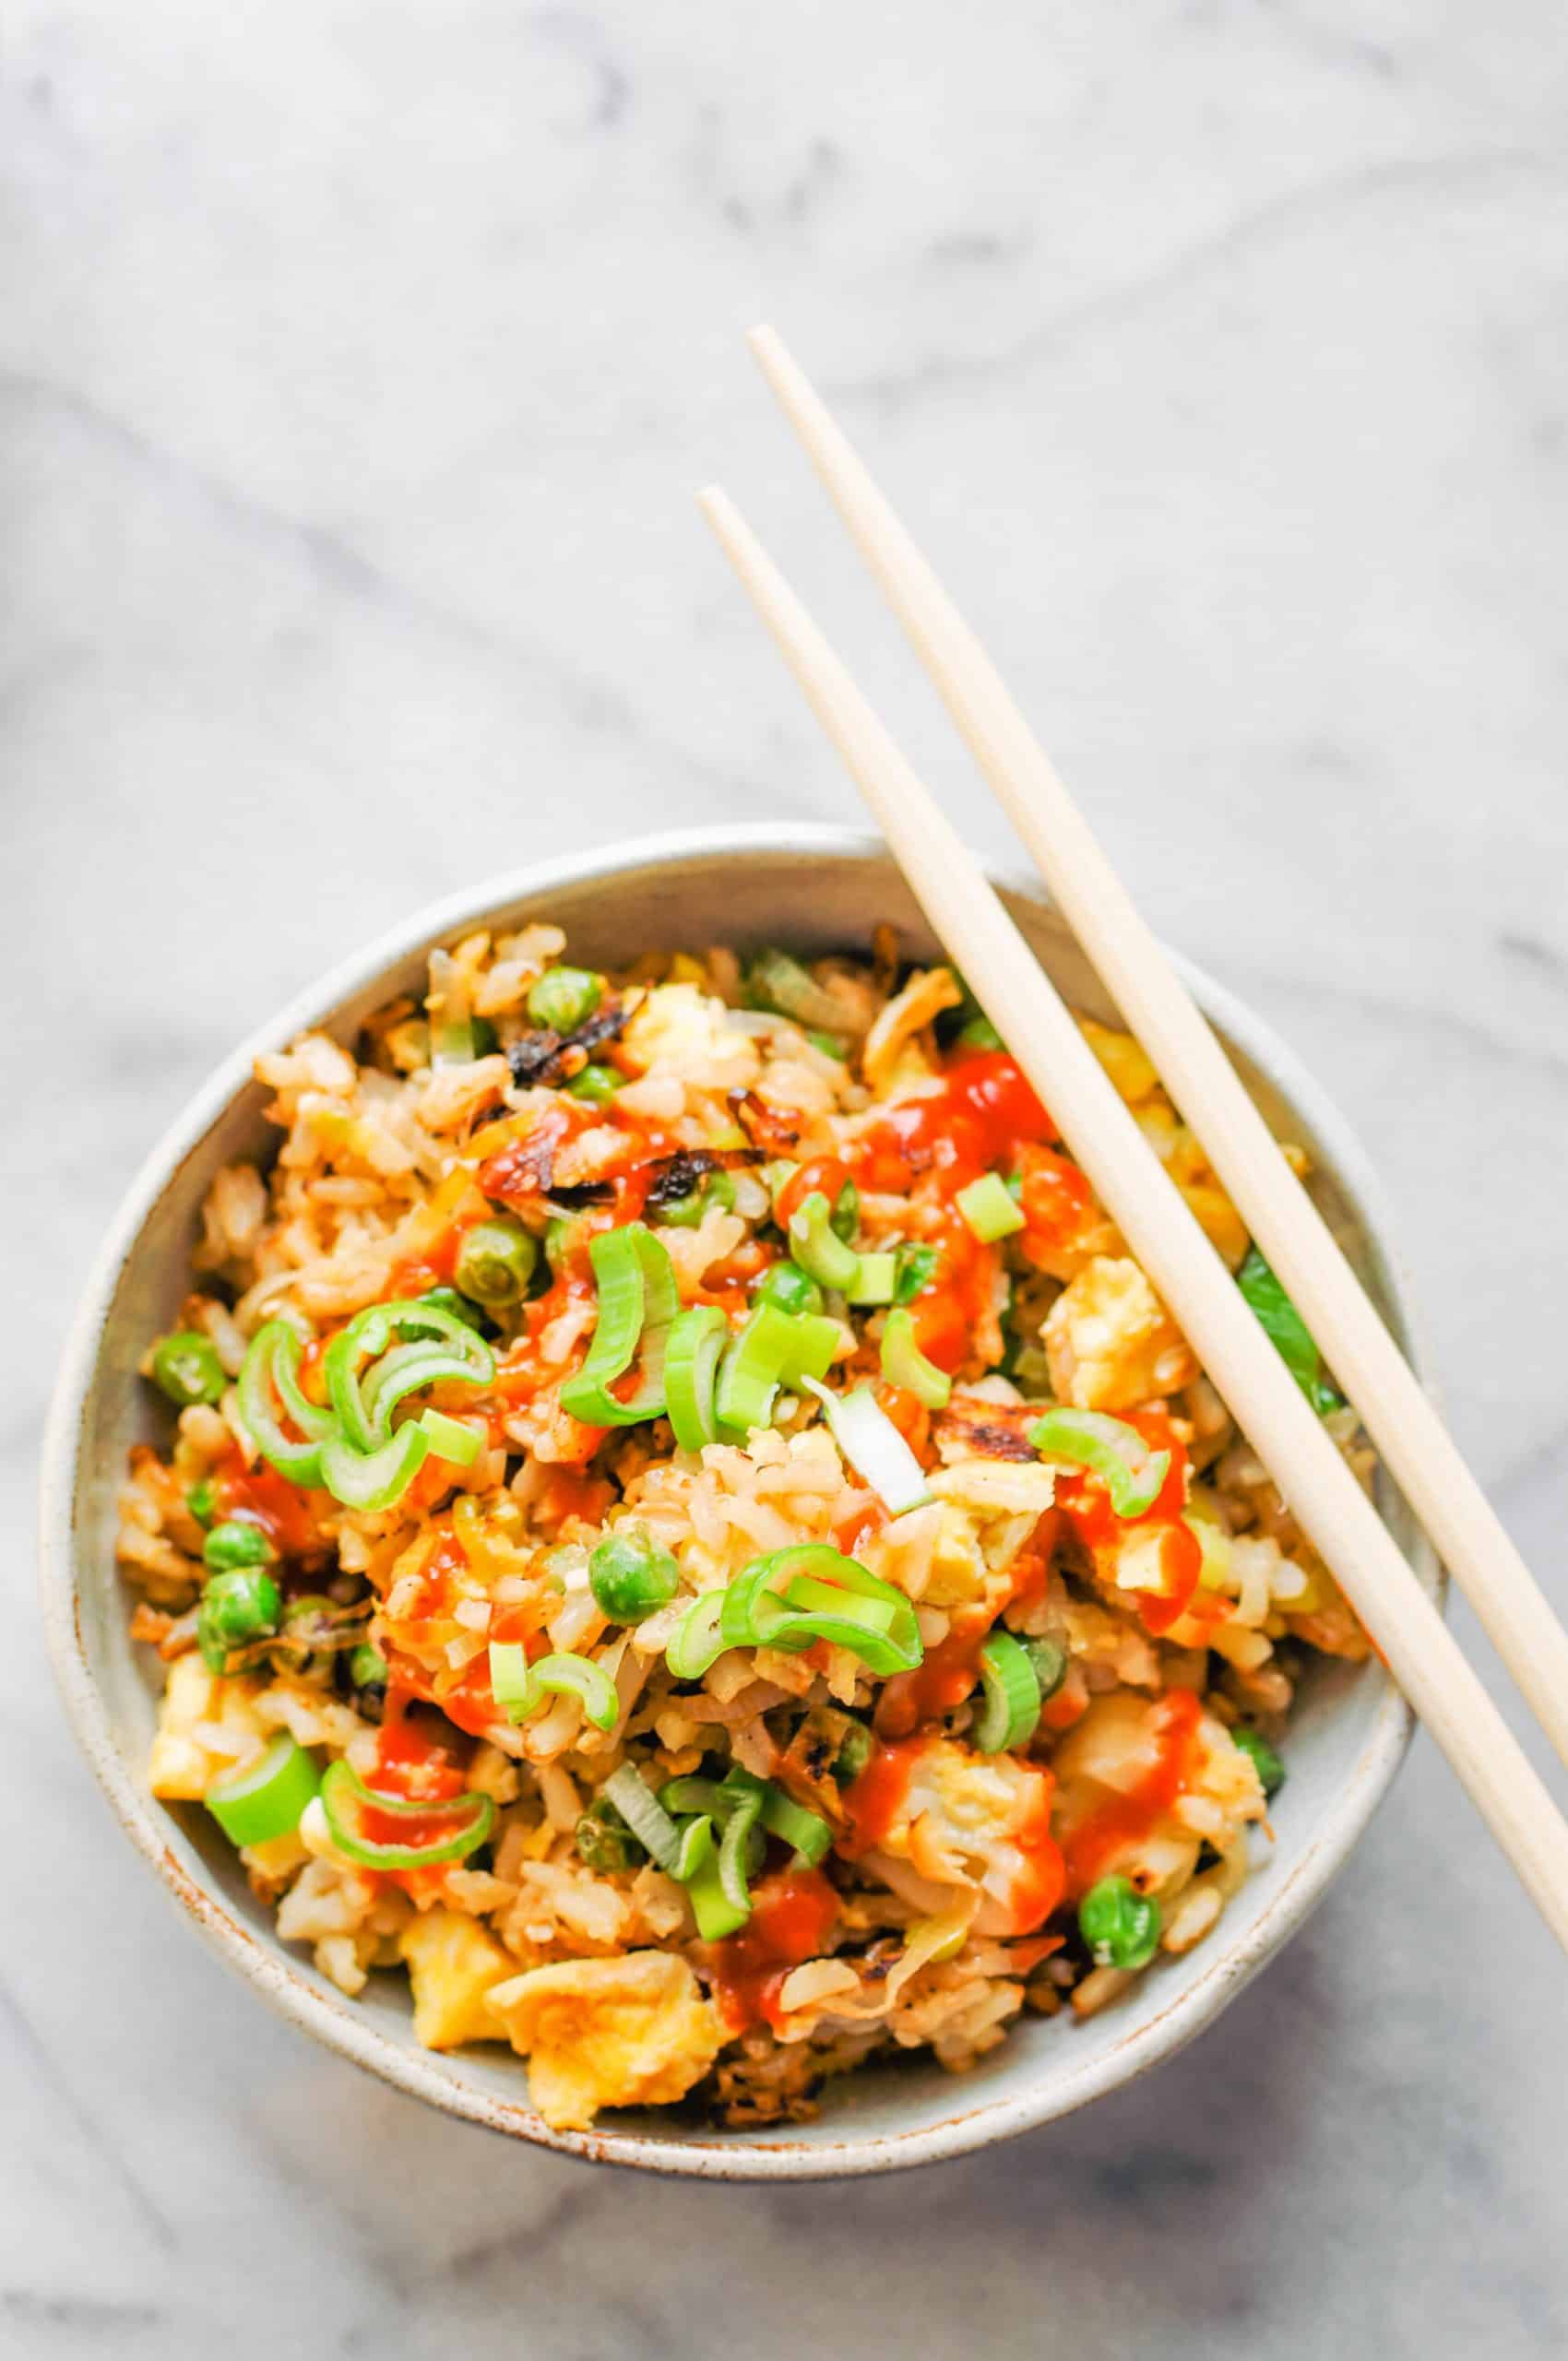 leek and pea fried rice in a bowl with chopsticks